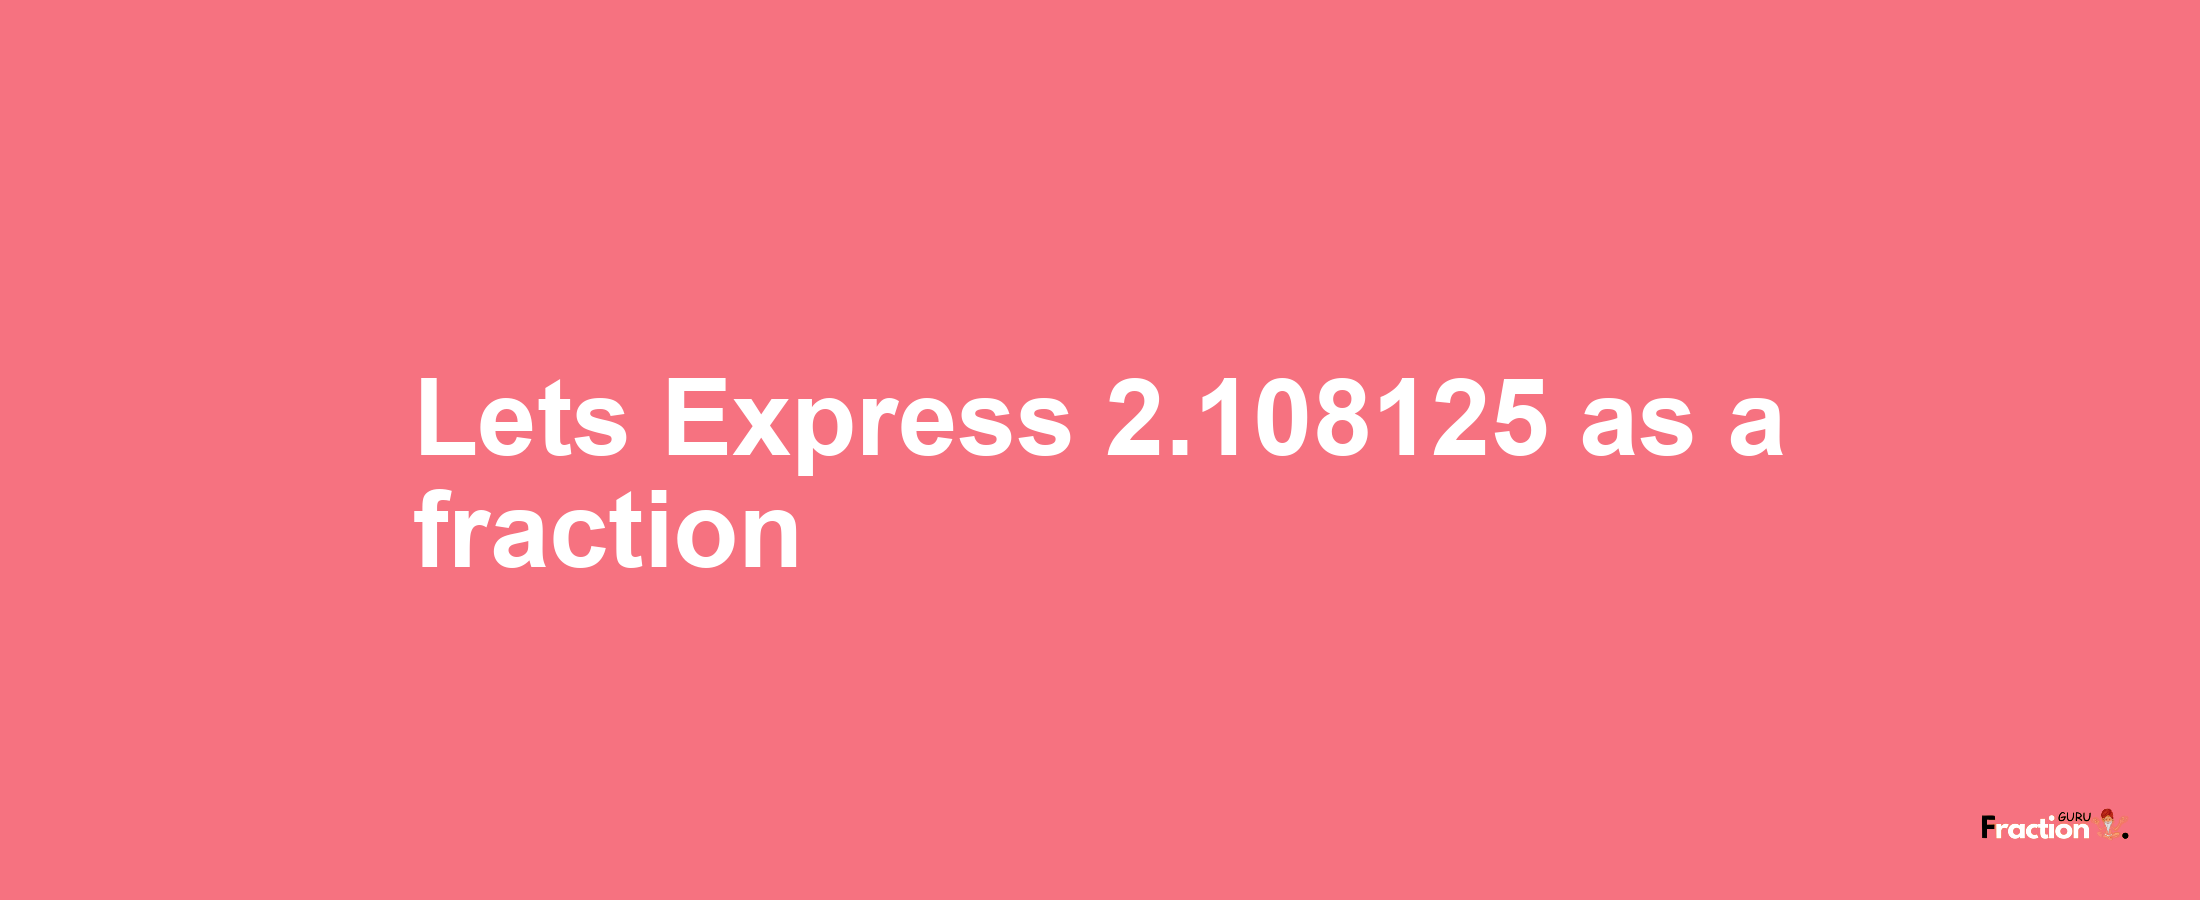 Lets Express 2.108125 as afraction